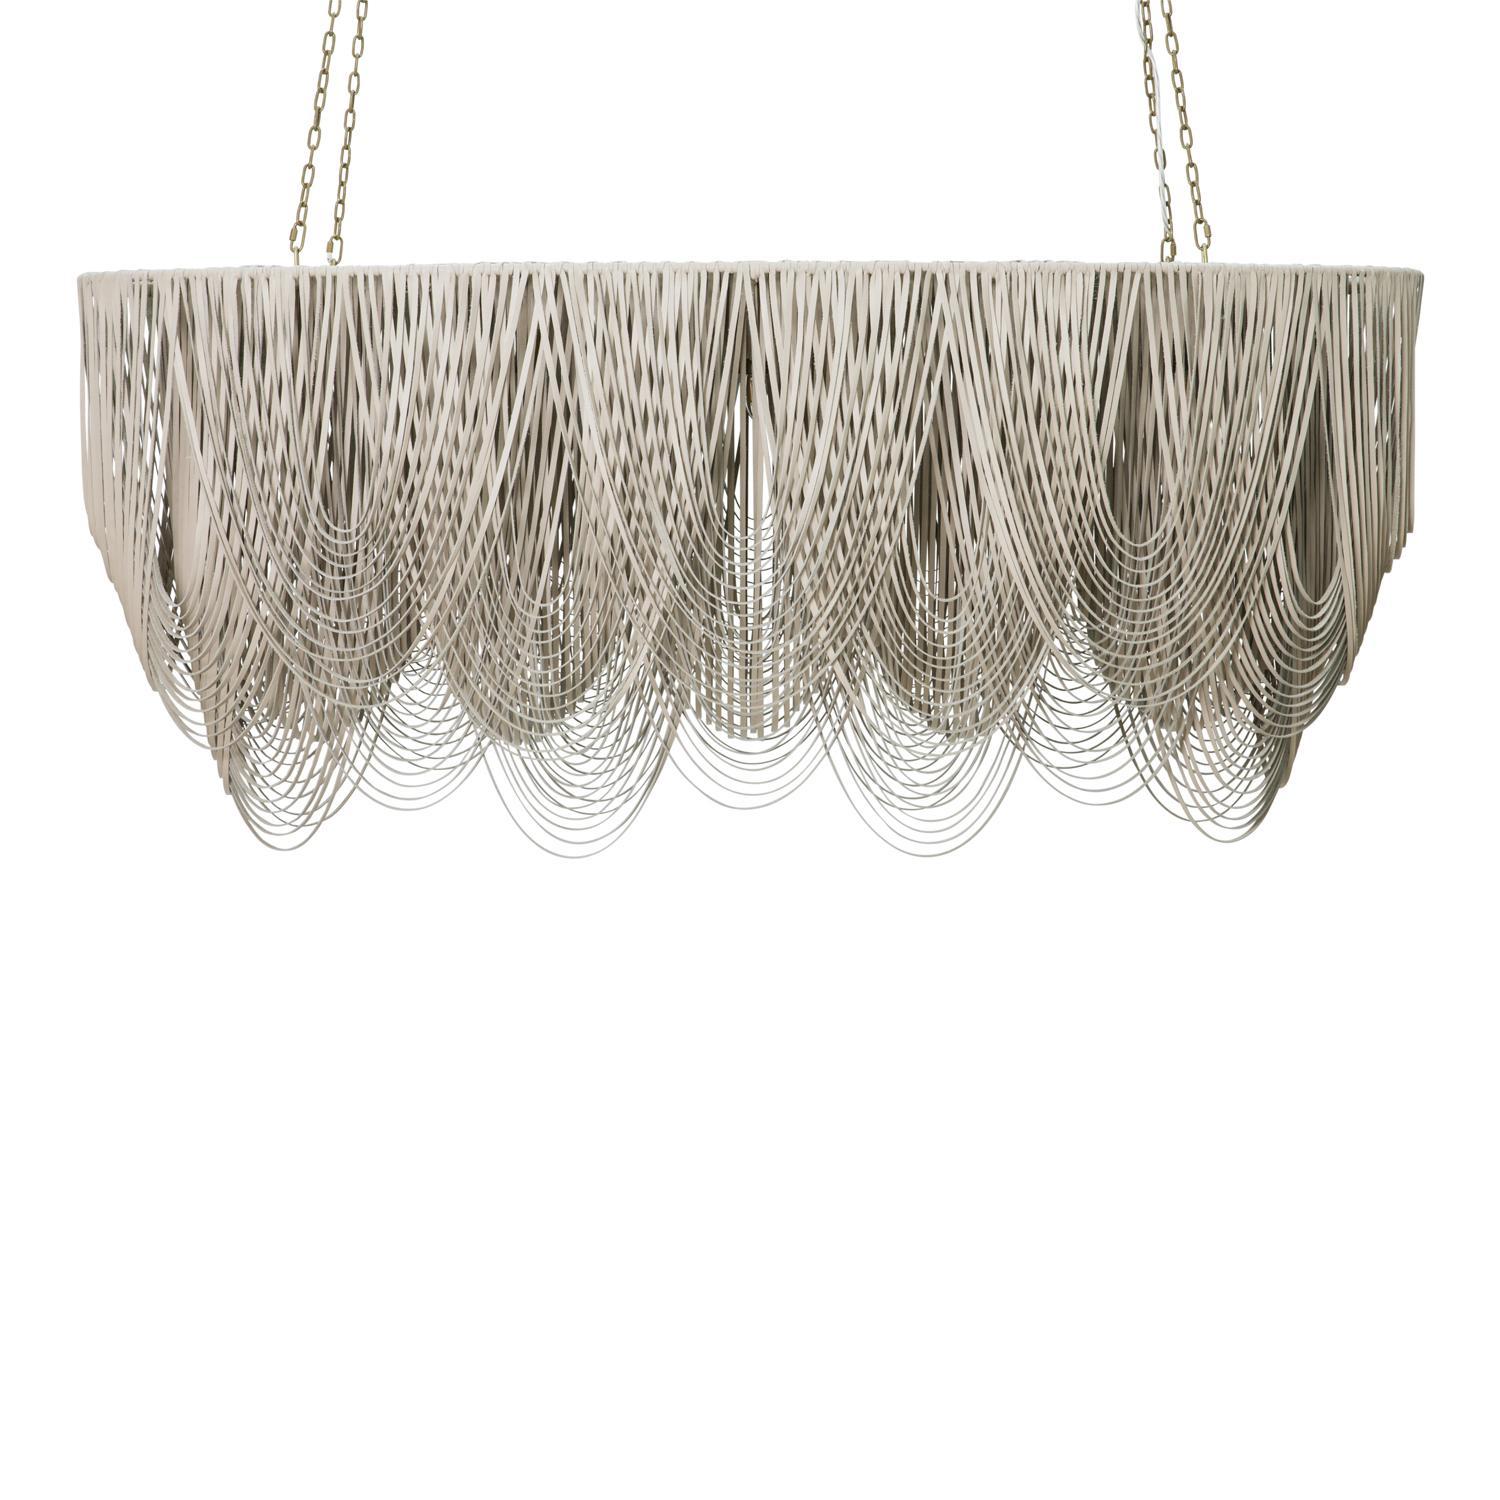 Whisper Chandelier - Oval - Large - Cream-Stone Leather